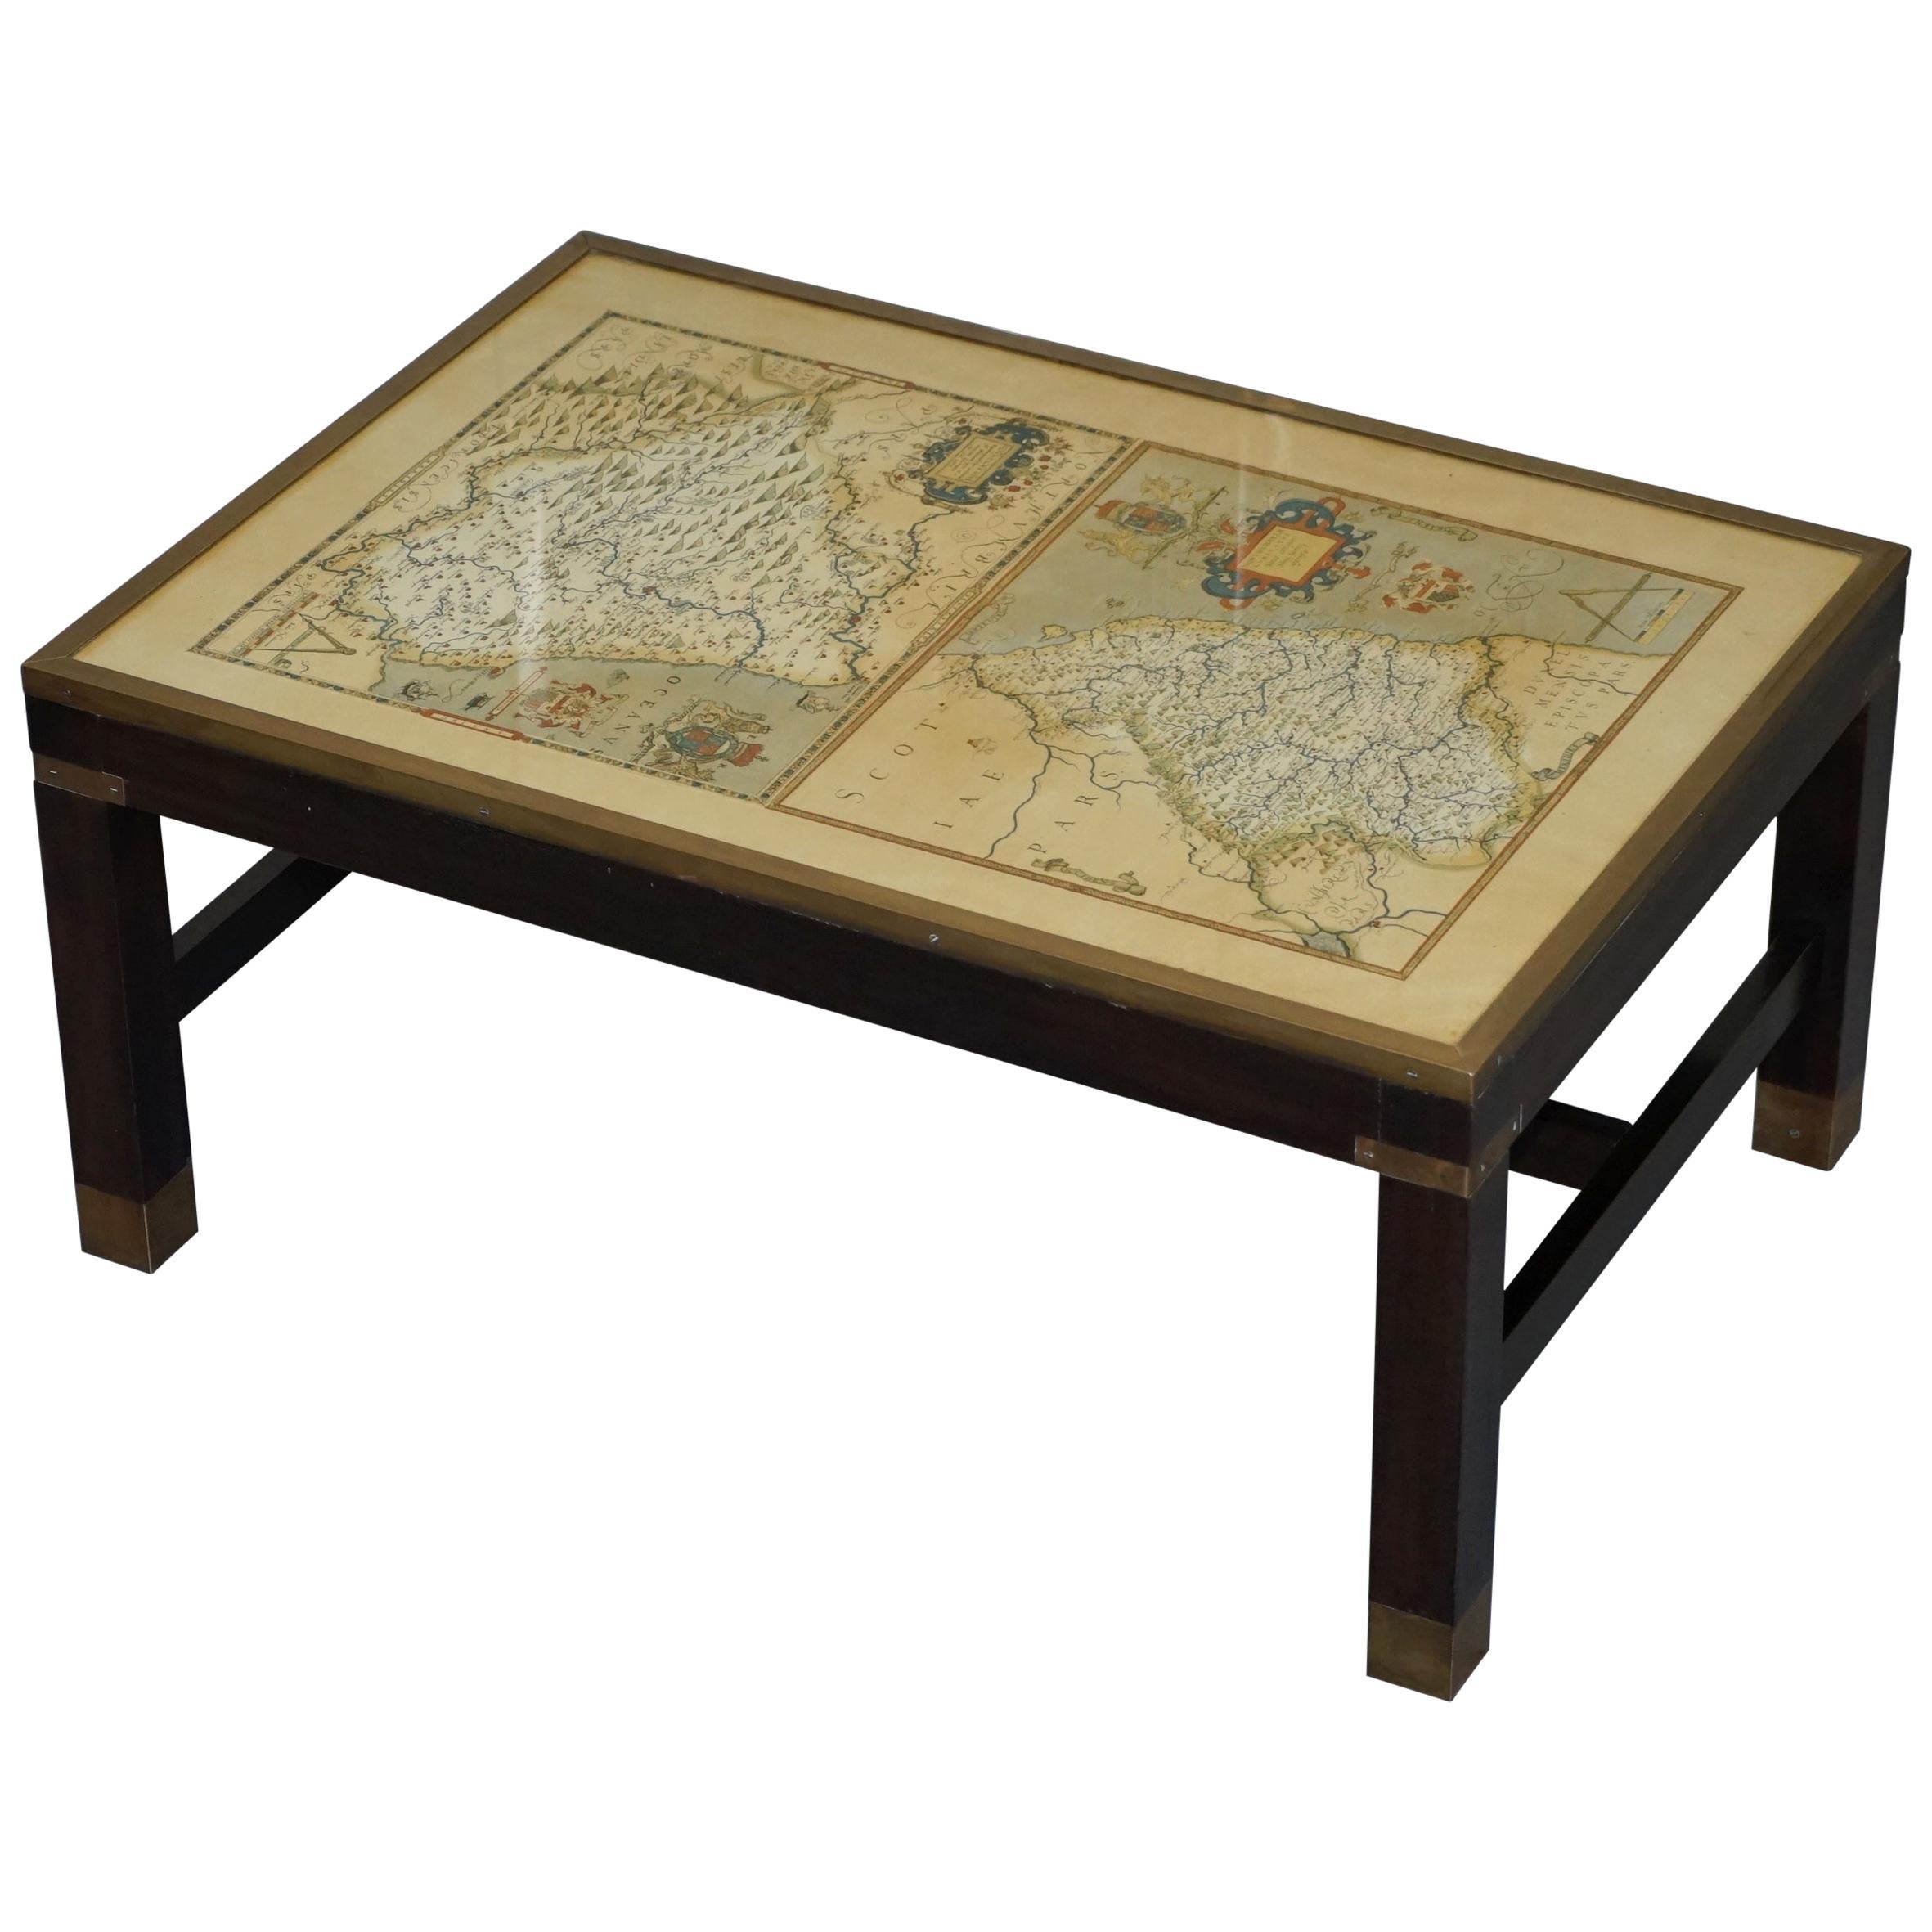 Lovely Vintage Map Coffee Table of Northumberland Military Campaign Style